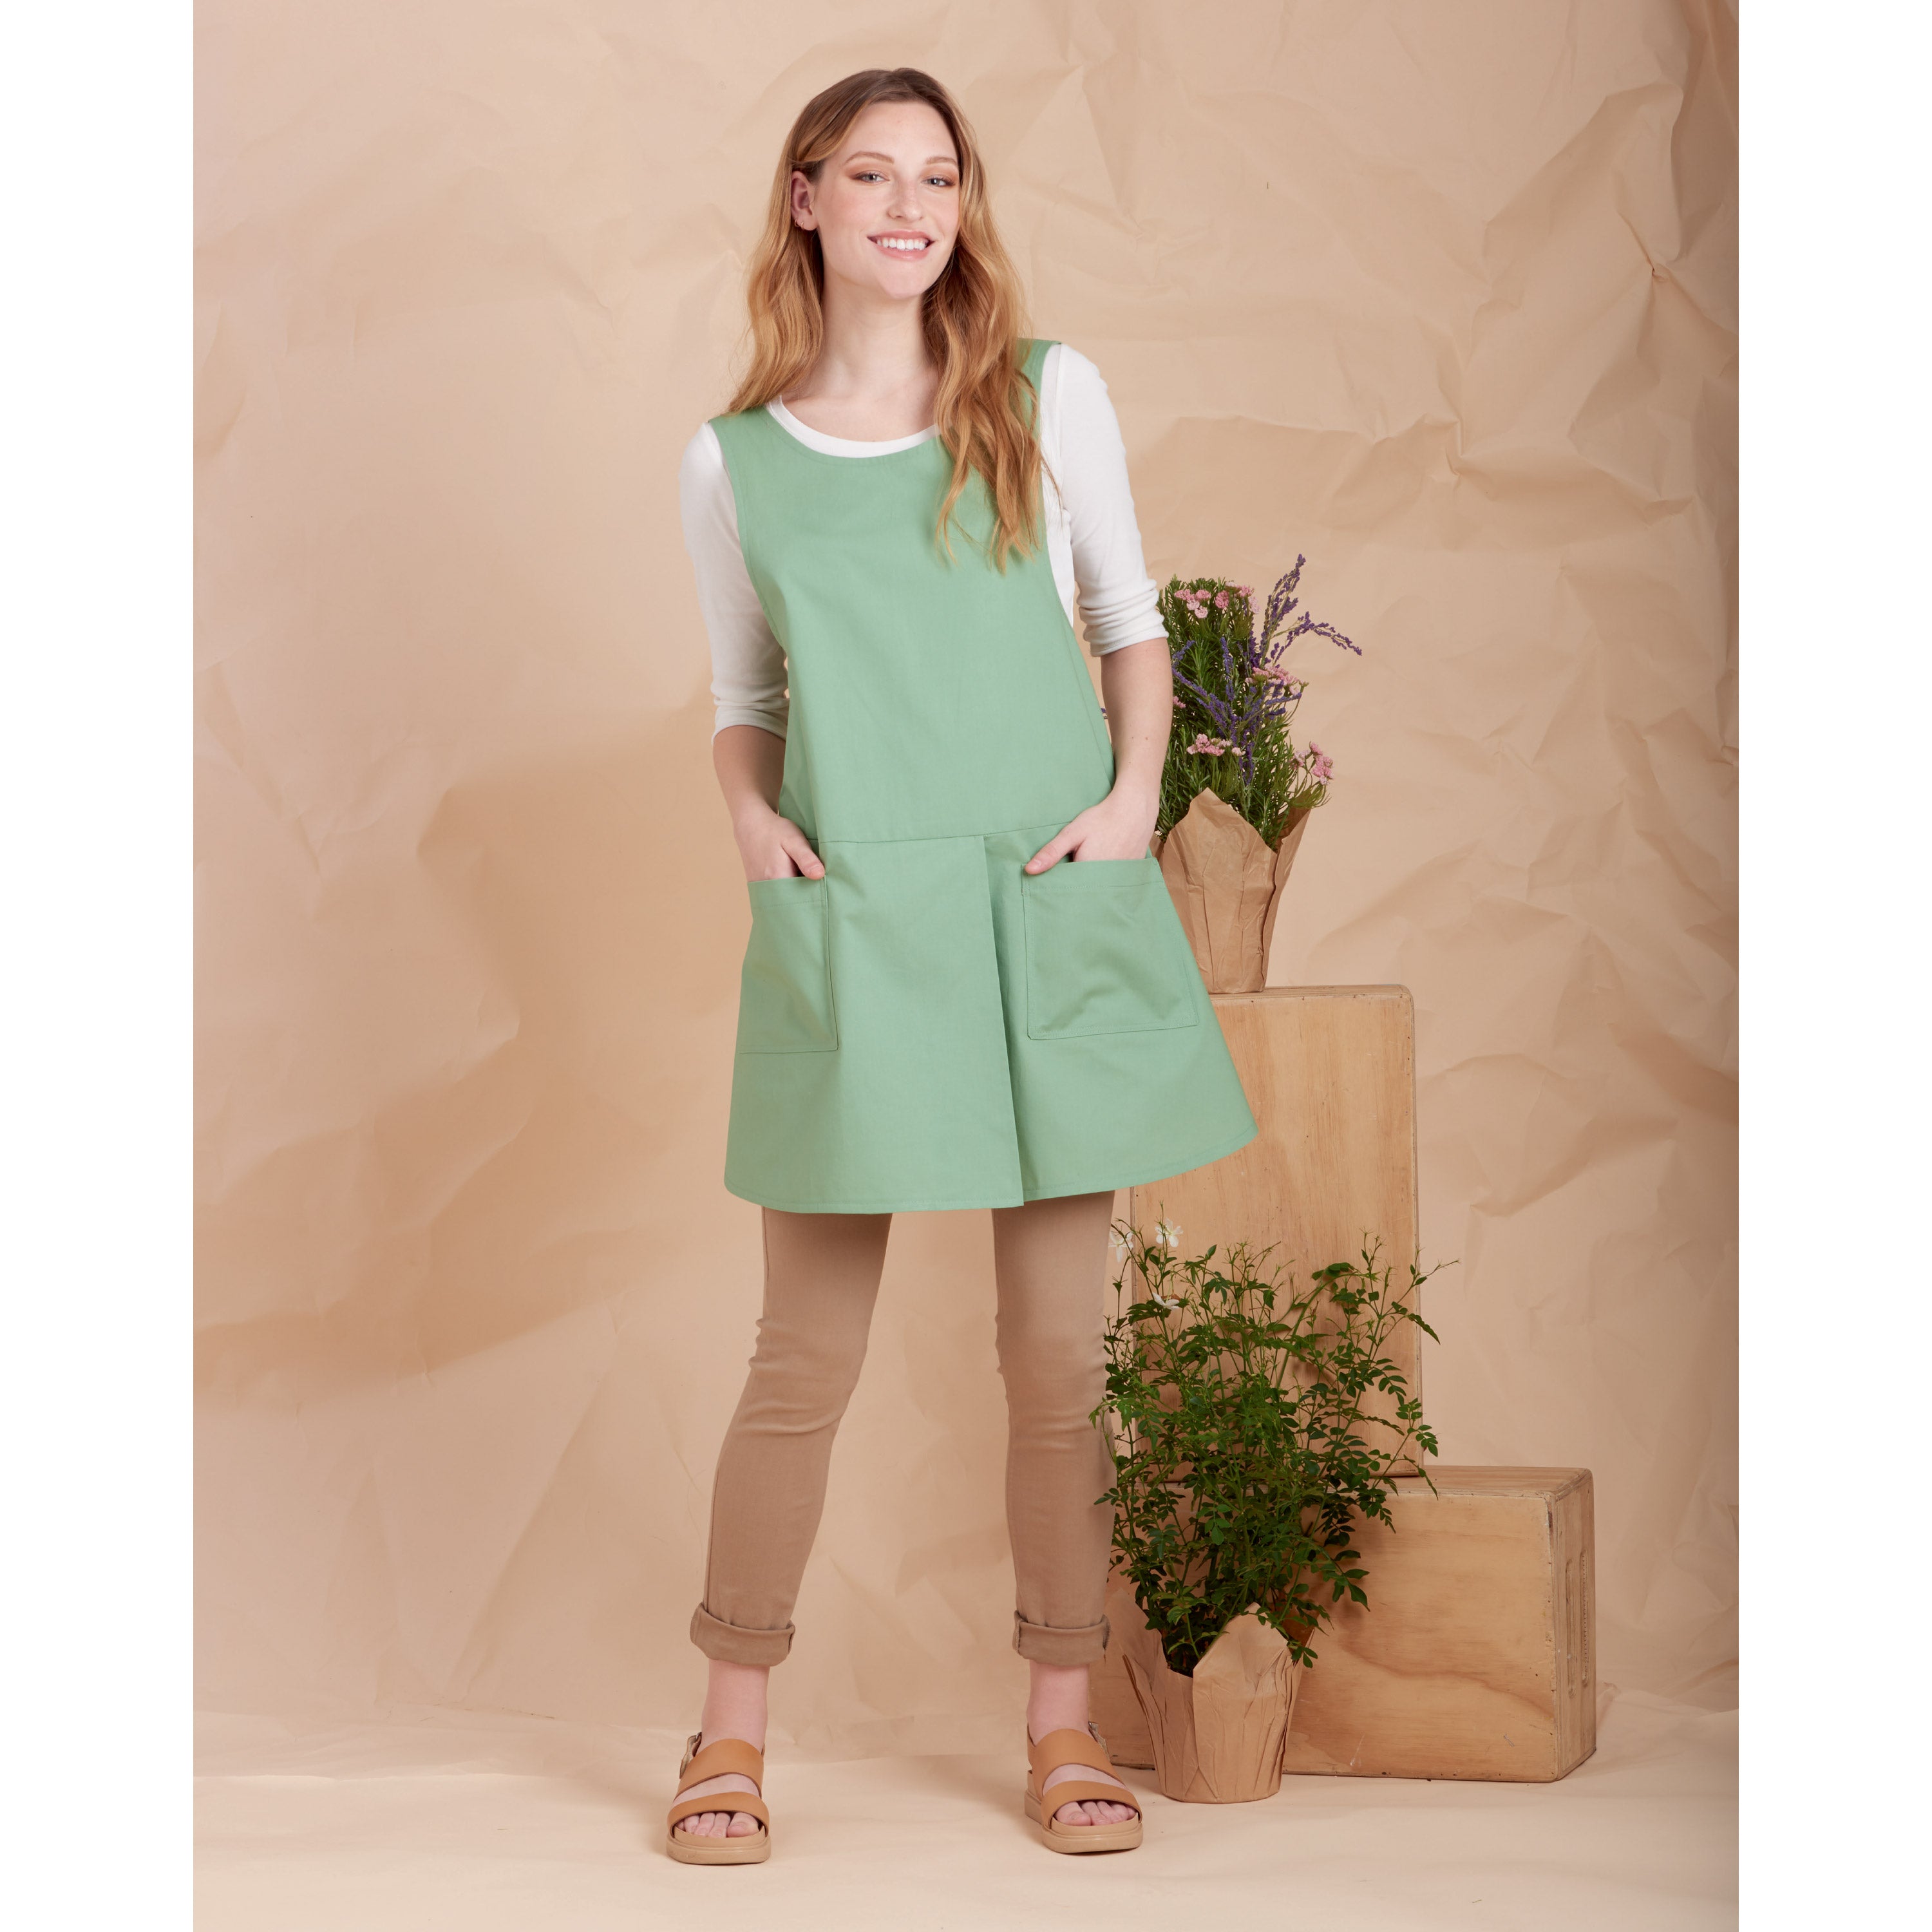 Simplicity 9564 Misses' Aprons pattern from Jaycotts Sewing Supplies